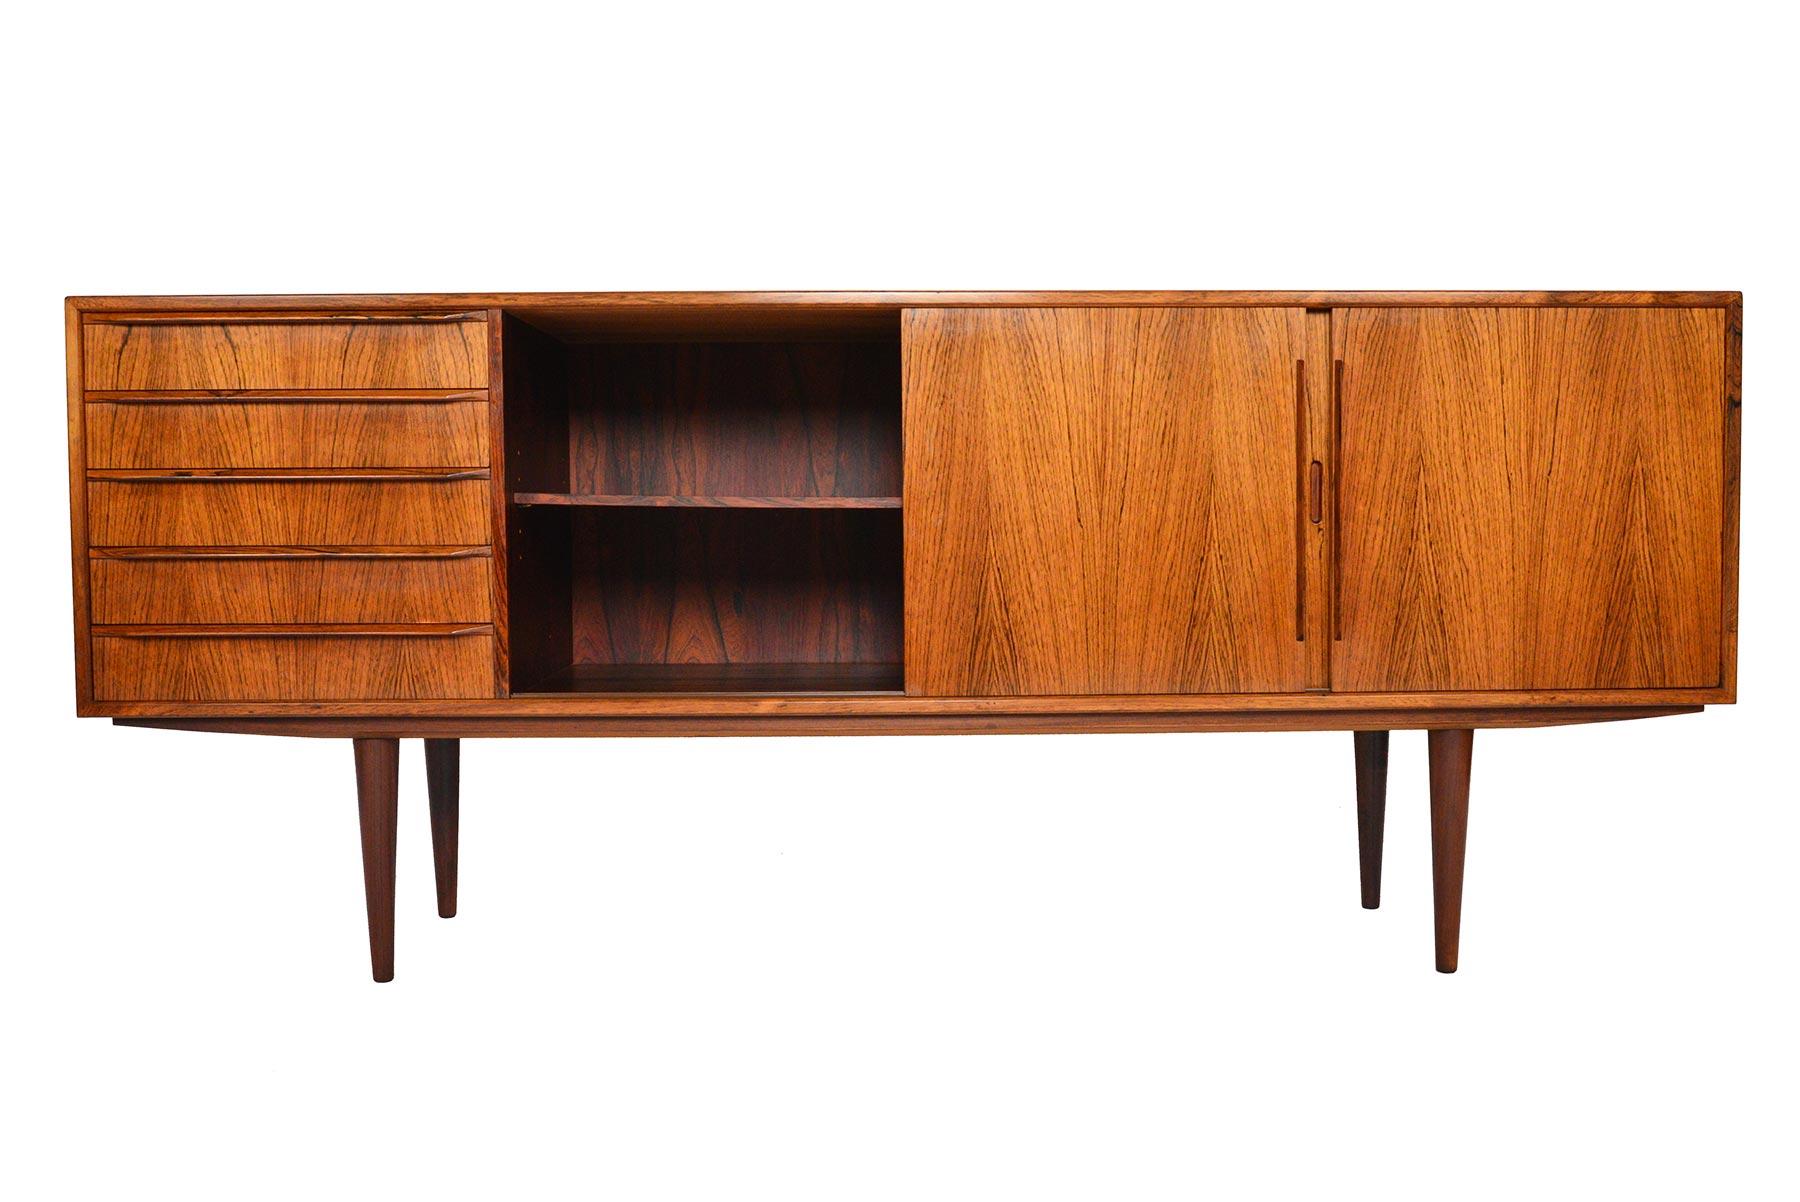 This striking Danish modern rosewood credenza was designed as Model 26 by Erling Torvits for Knud Nielsen in the 1960s. Crafted in beautifully sun bleached rosewood, this piece features a bank of five-drawers and two-bays with adjustable shelves.